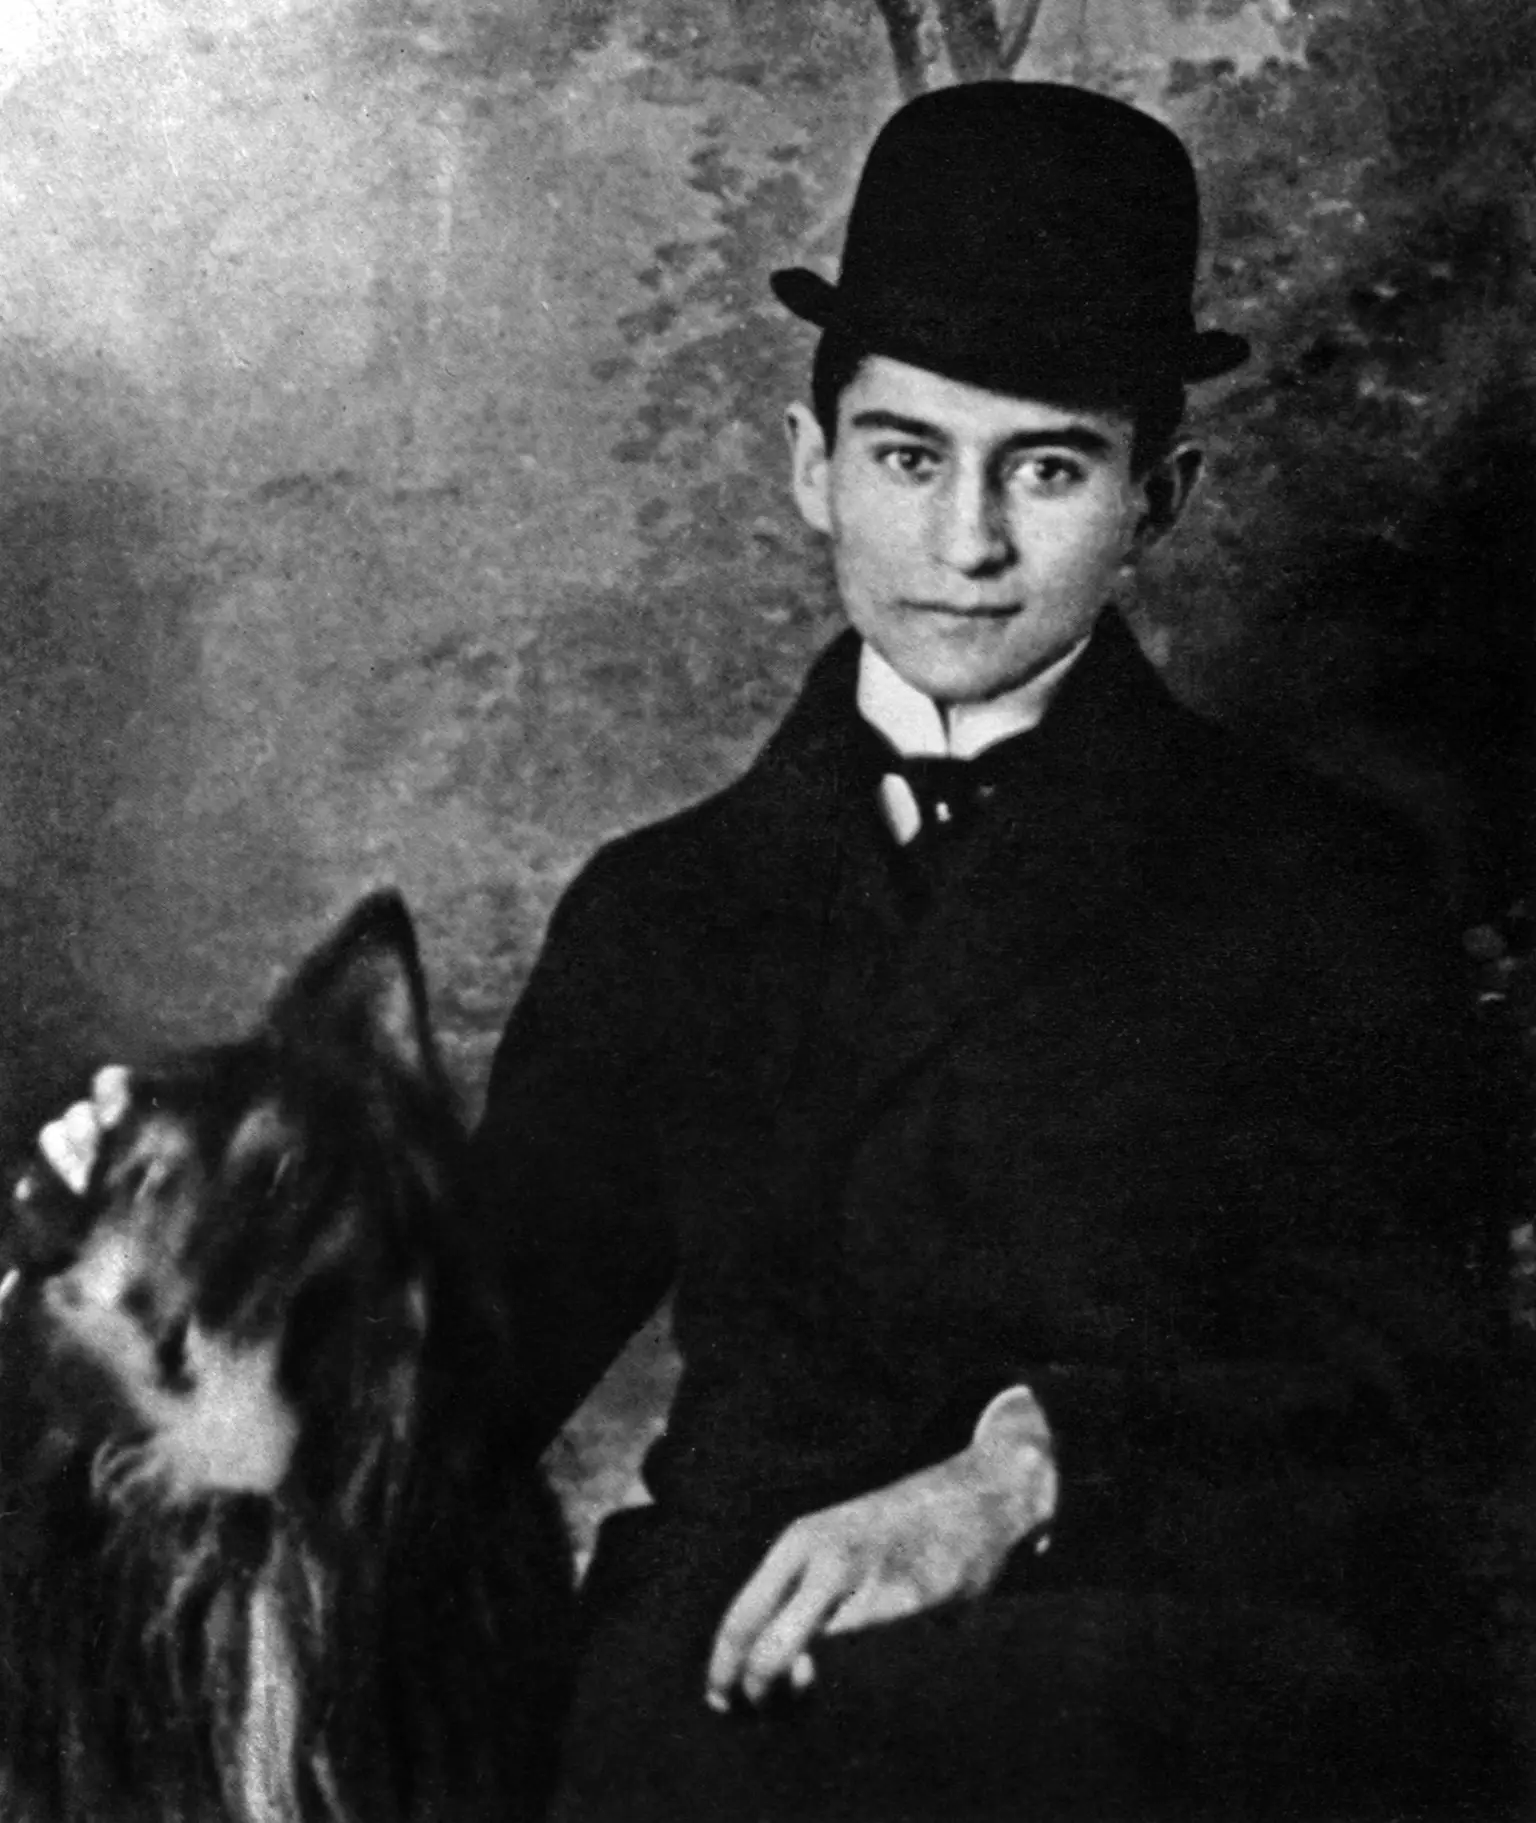 Uncovering the Truth An In-Depth Look into Kafka's 'Investigations of a Dog'